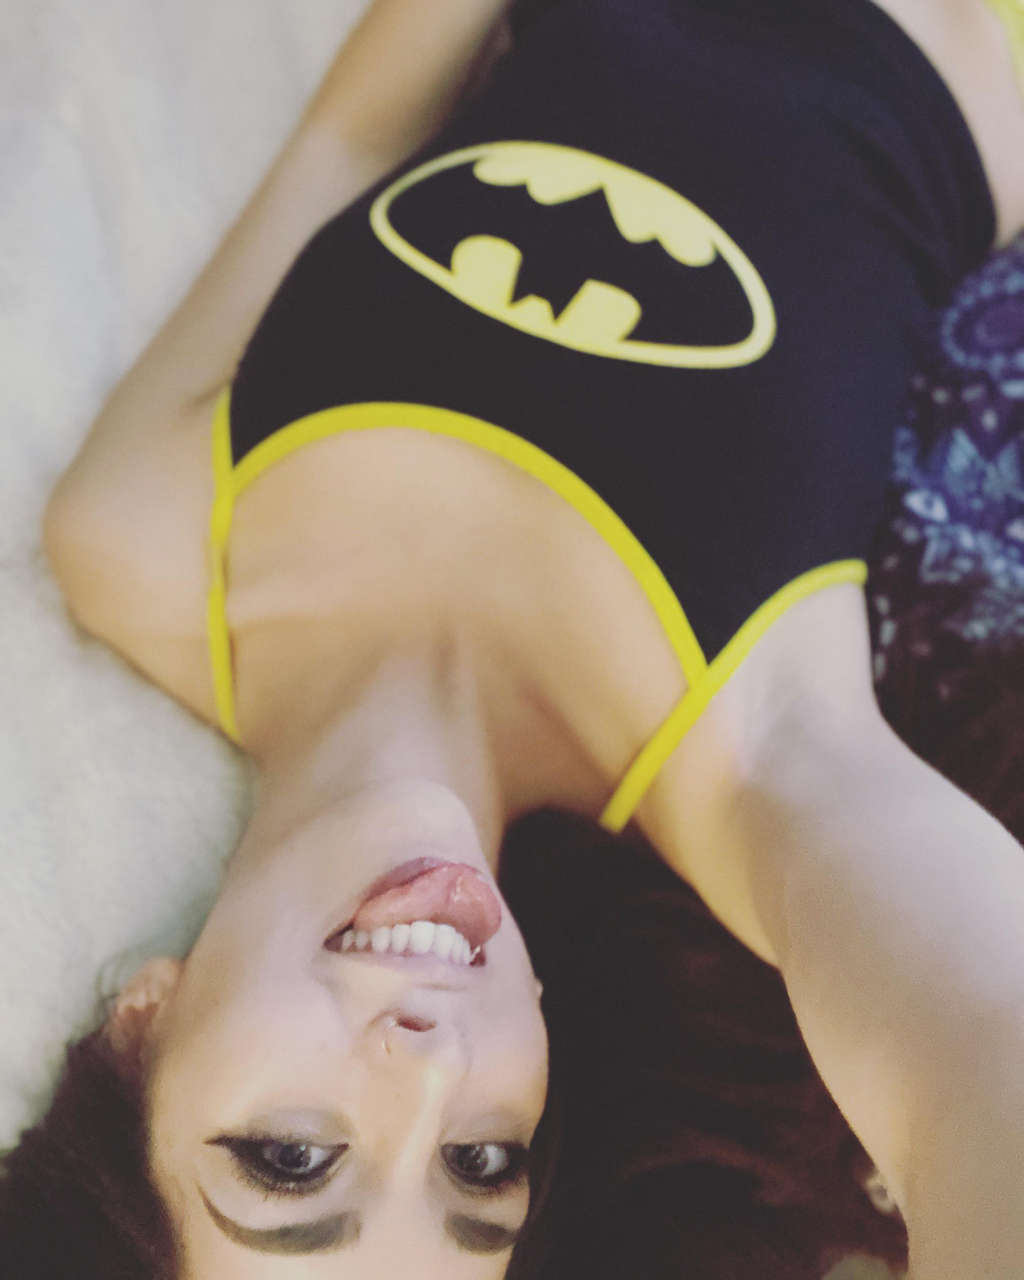 I Just Want To Do A Bunch Of Batman Cosplays Already But For Now I Have This Pj Set F Sel